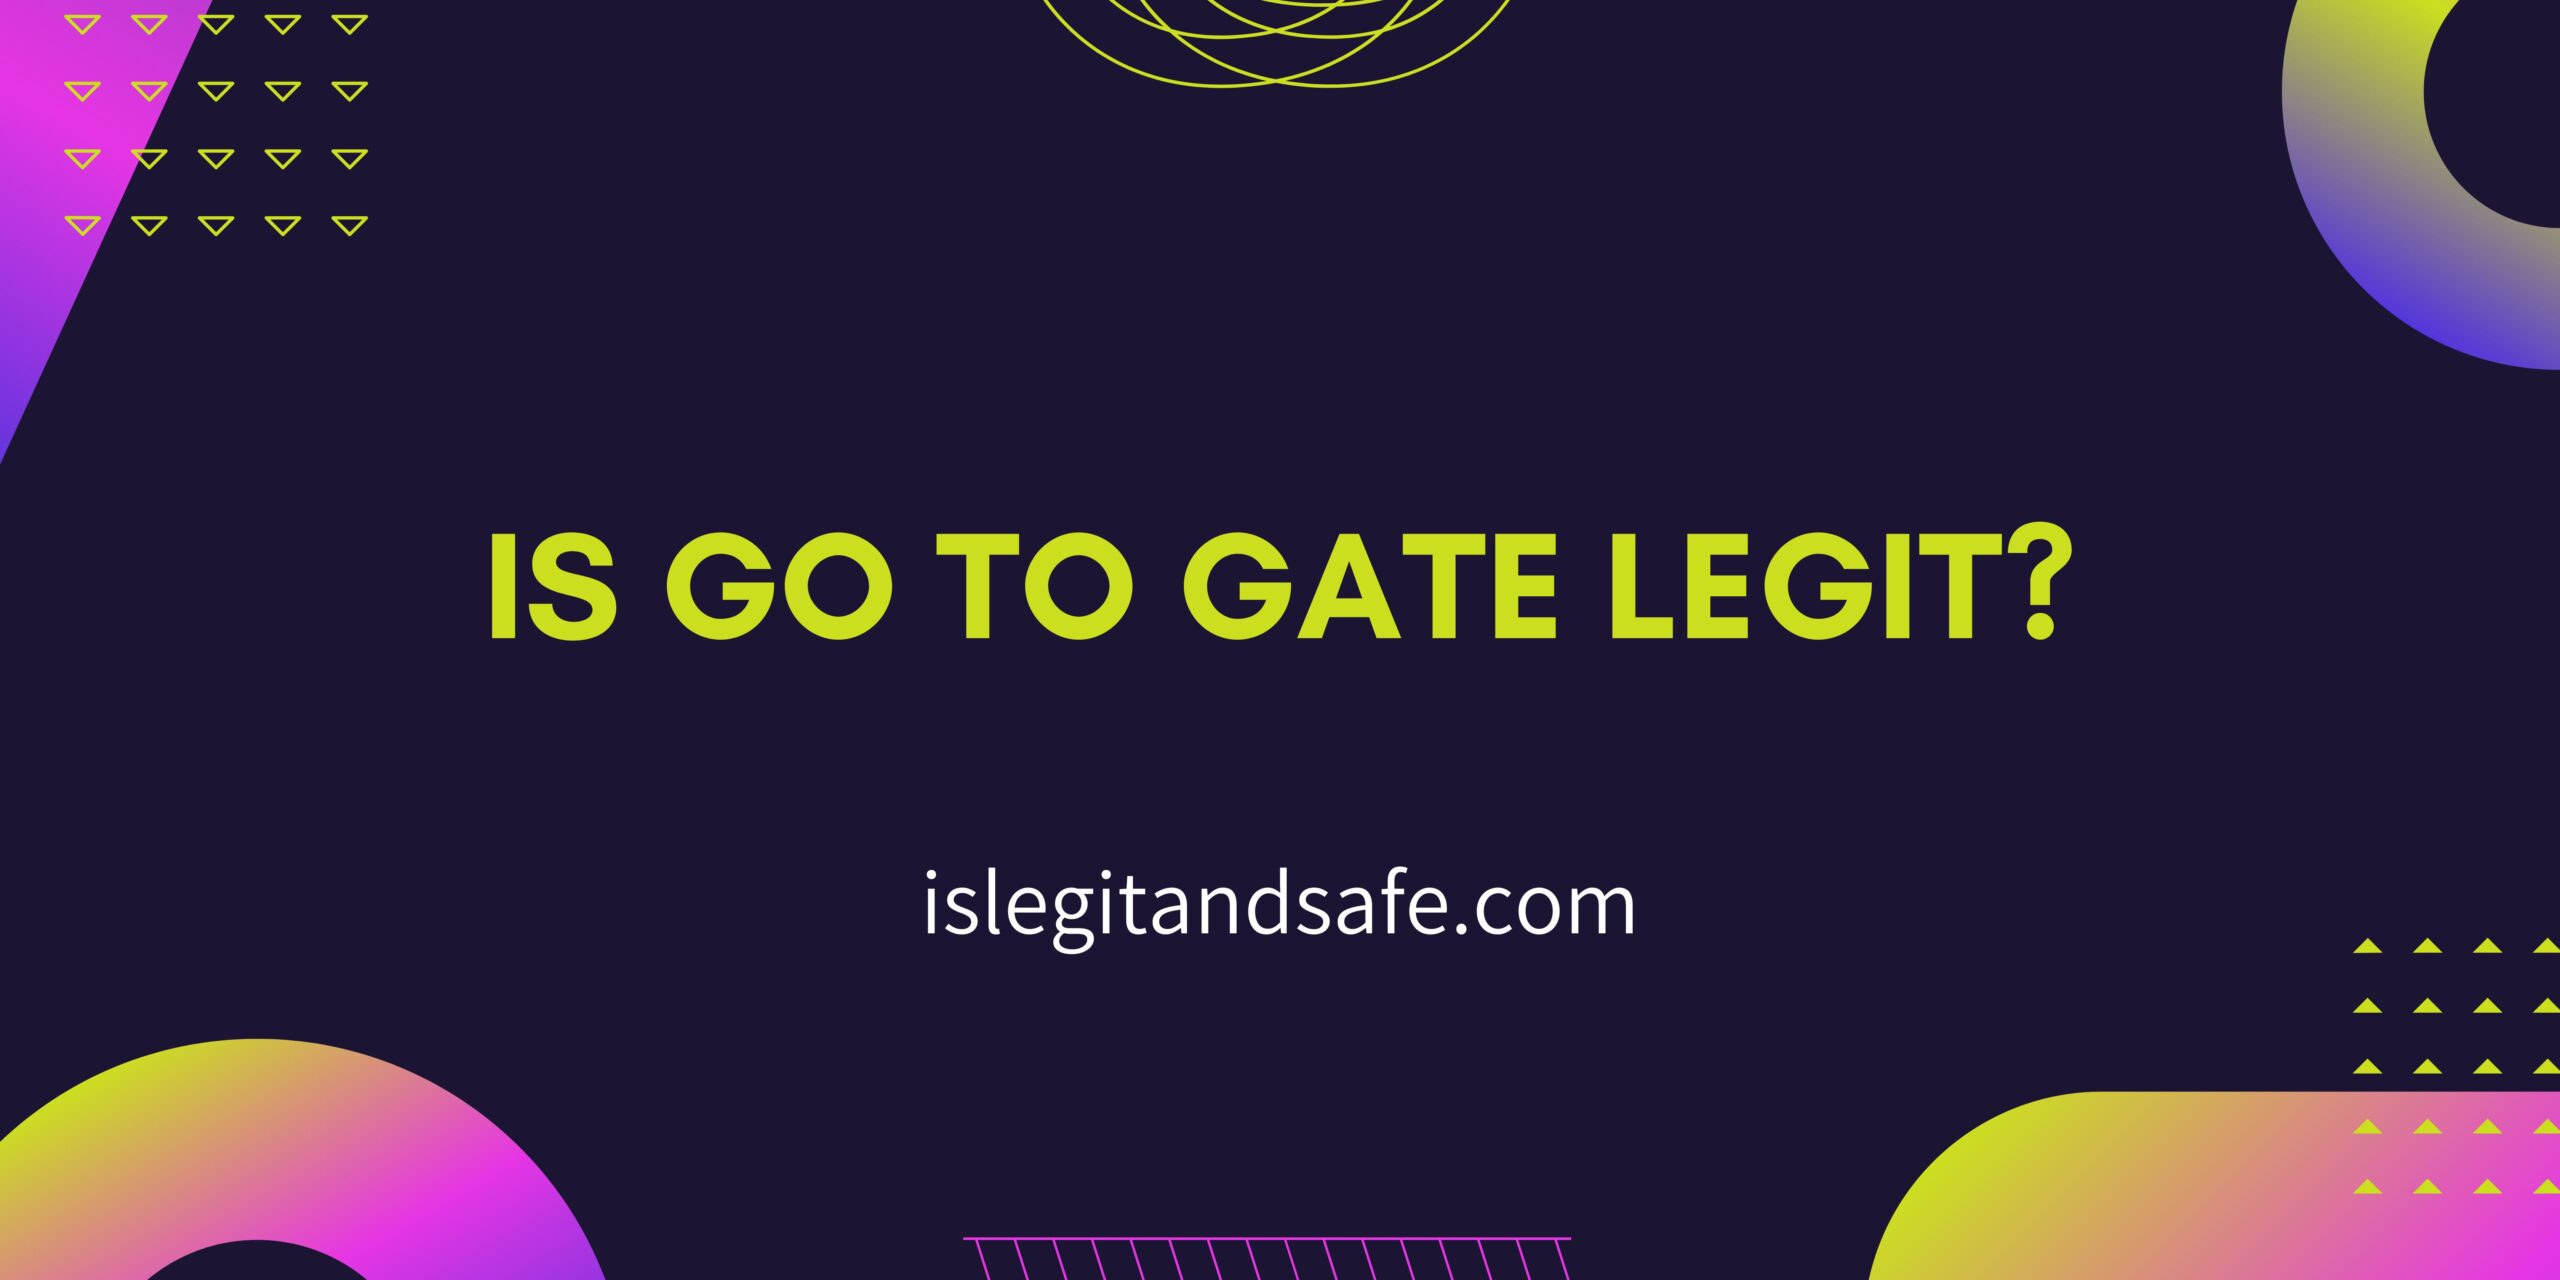 Is Go to Gate Legit?